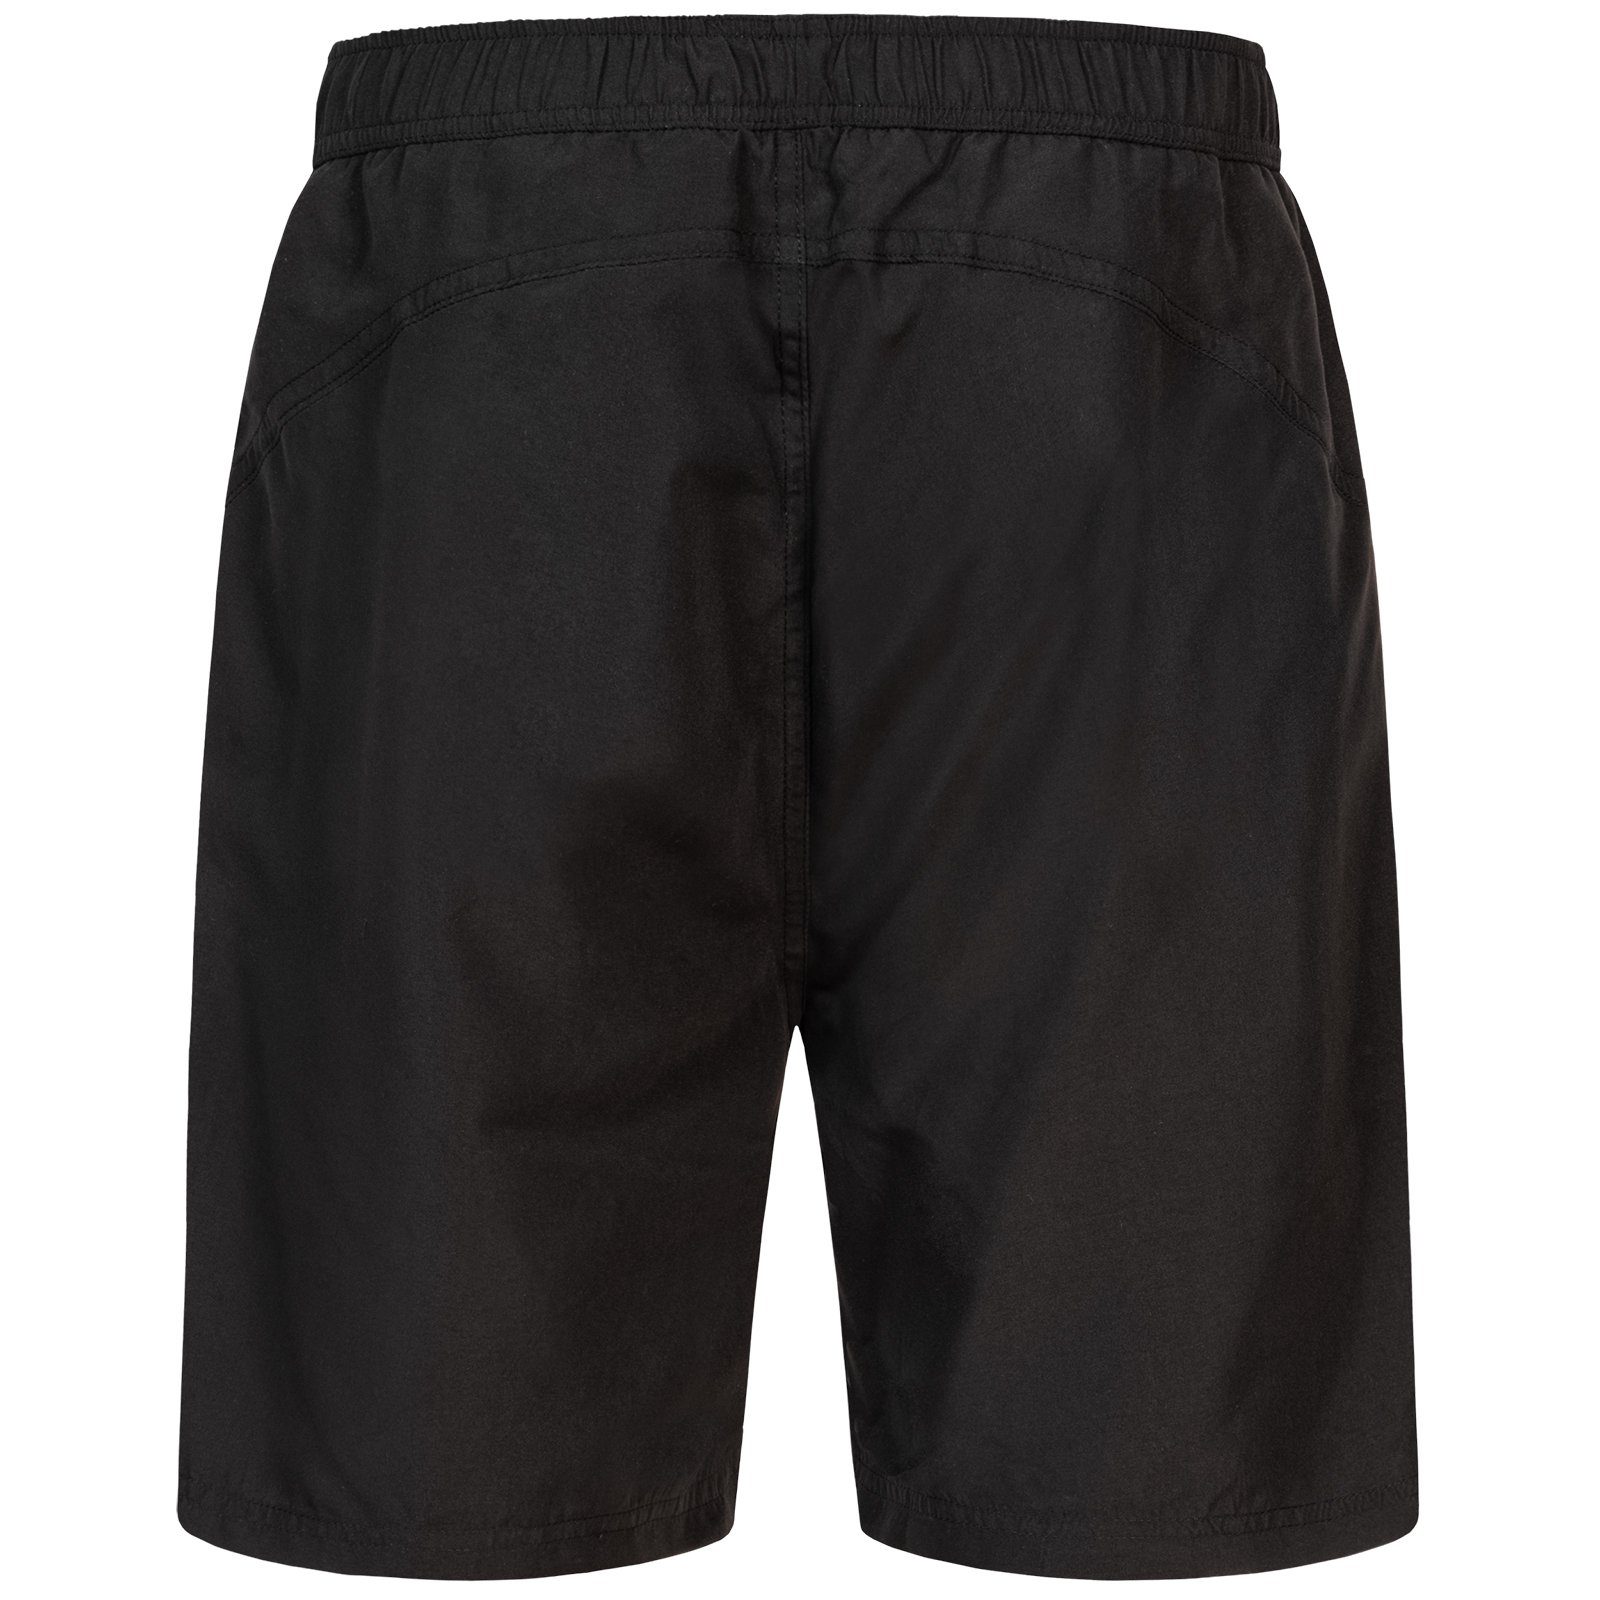 Lonsdale Badehose CARNKIE Black/Red/White